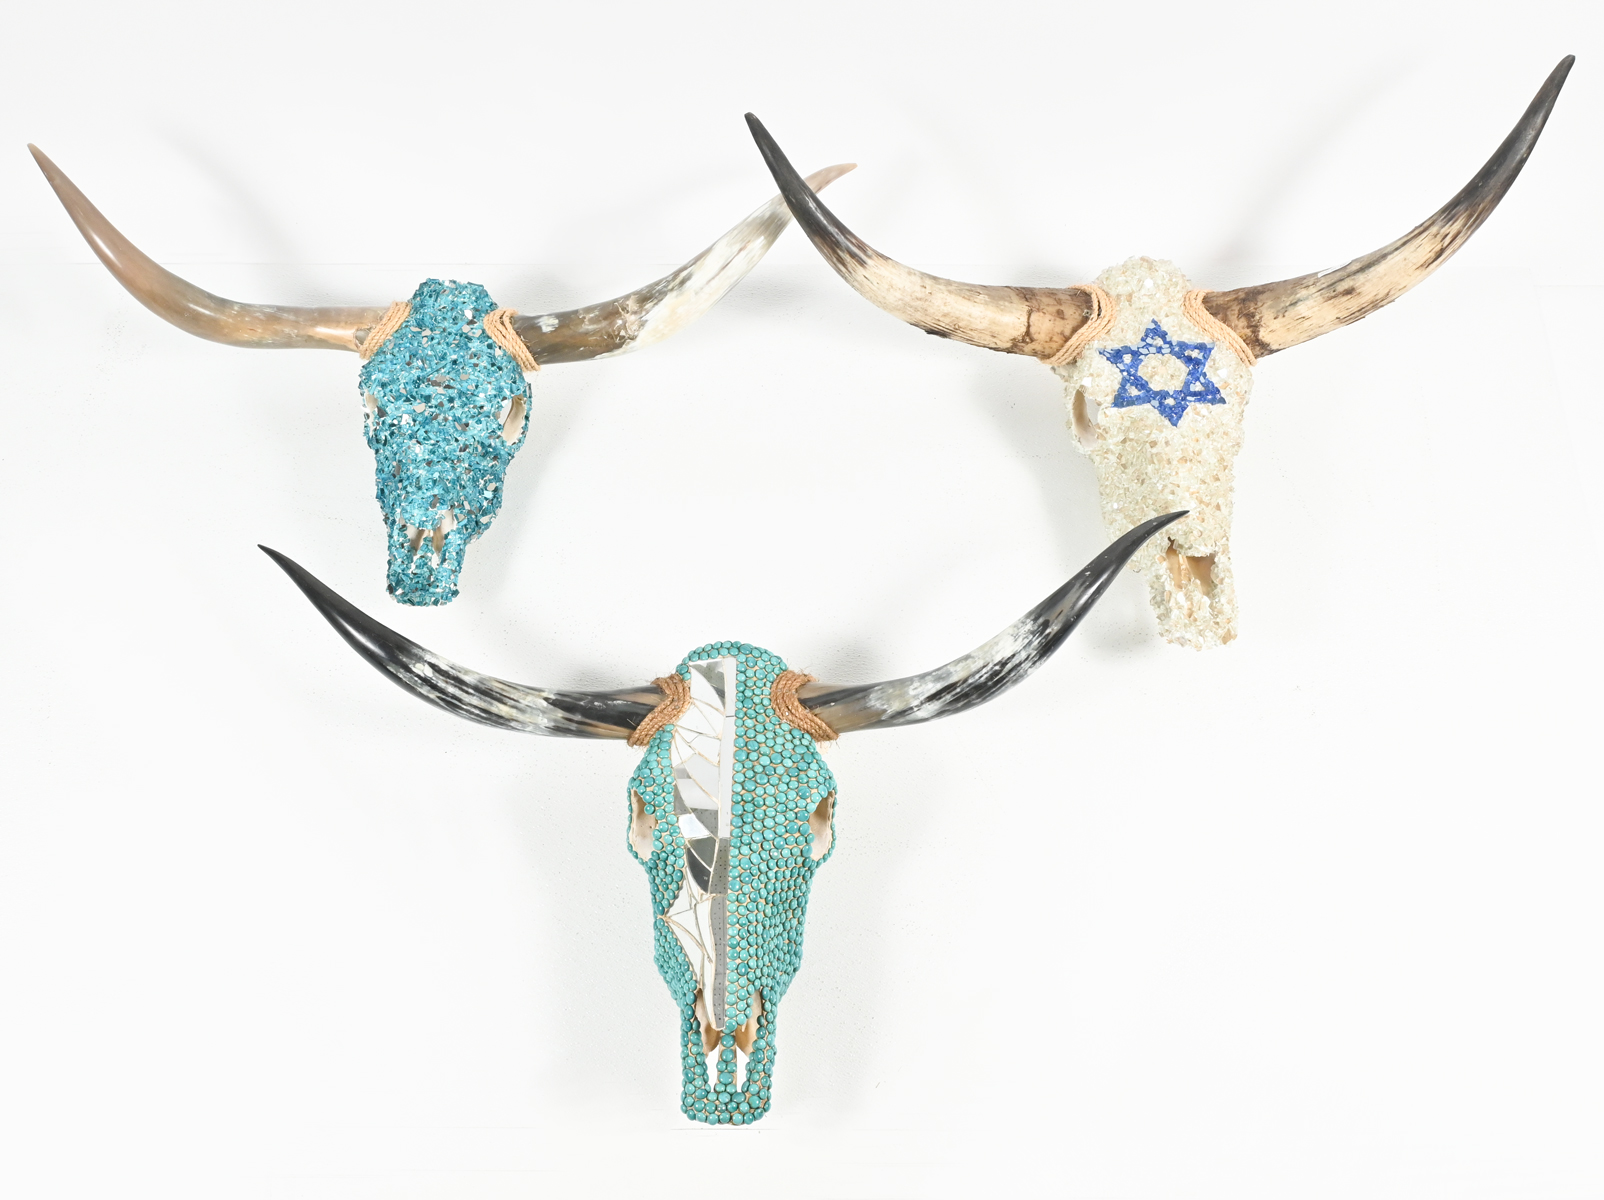 3 DECORATED COW SKULL SCULPTURES  2ed3d6